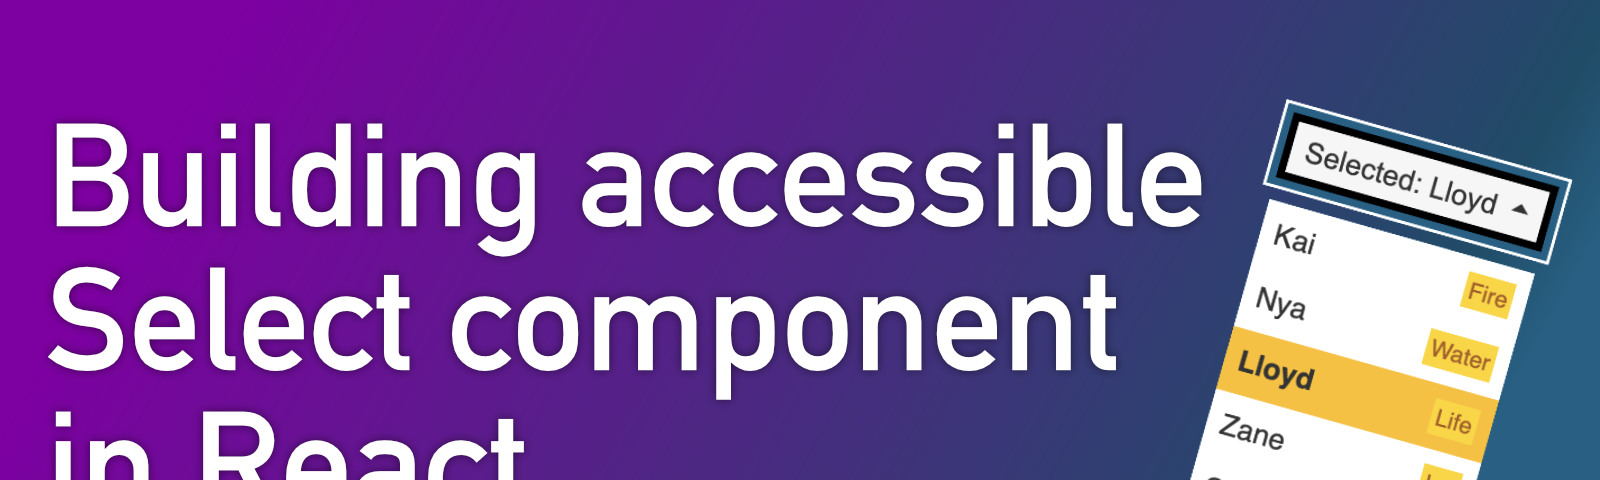 Building accessible select component in React — cover picture.